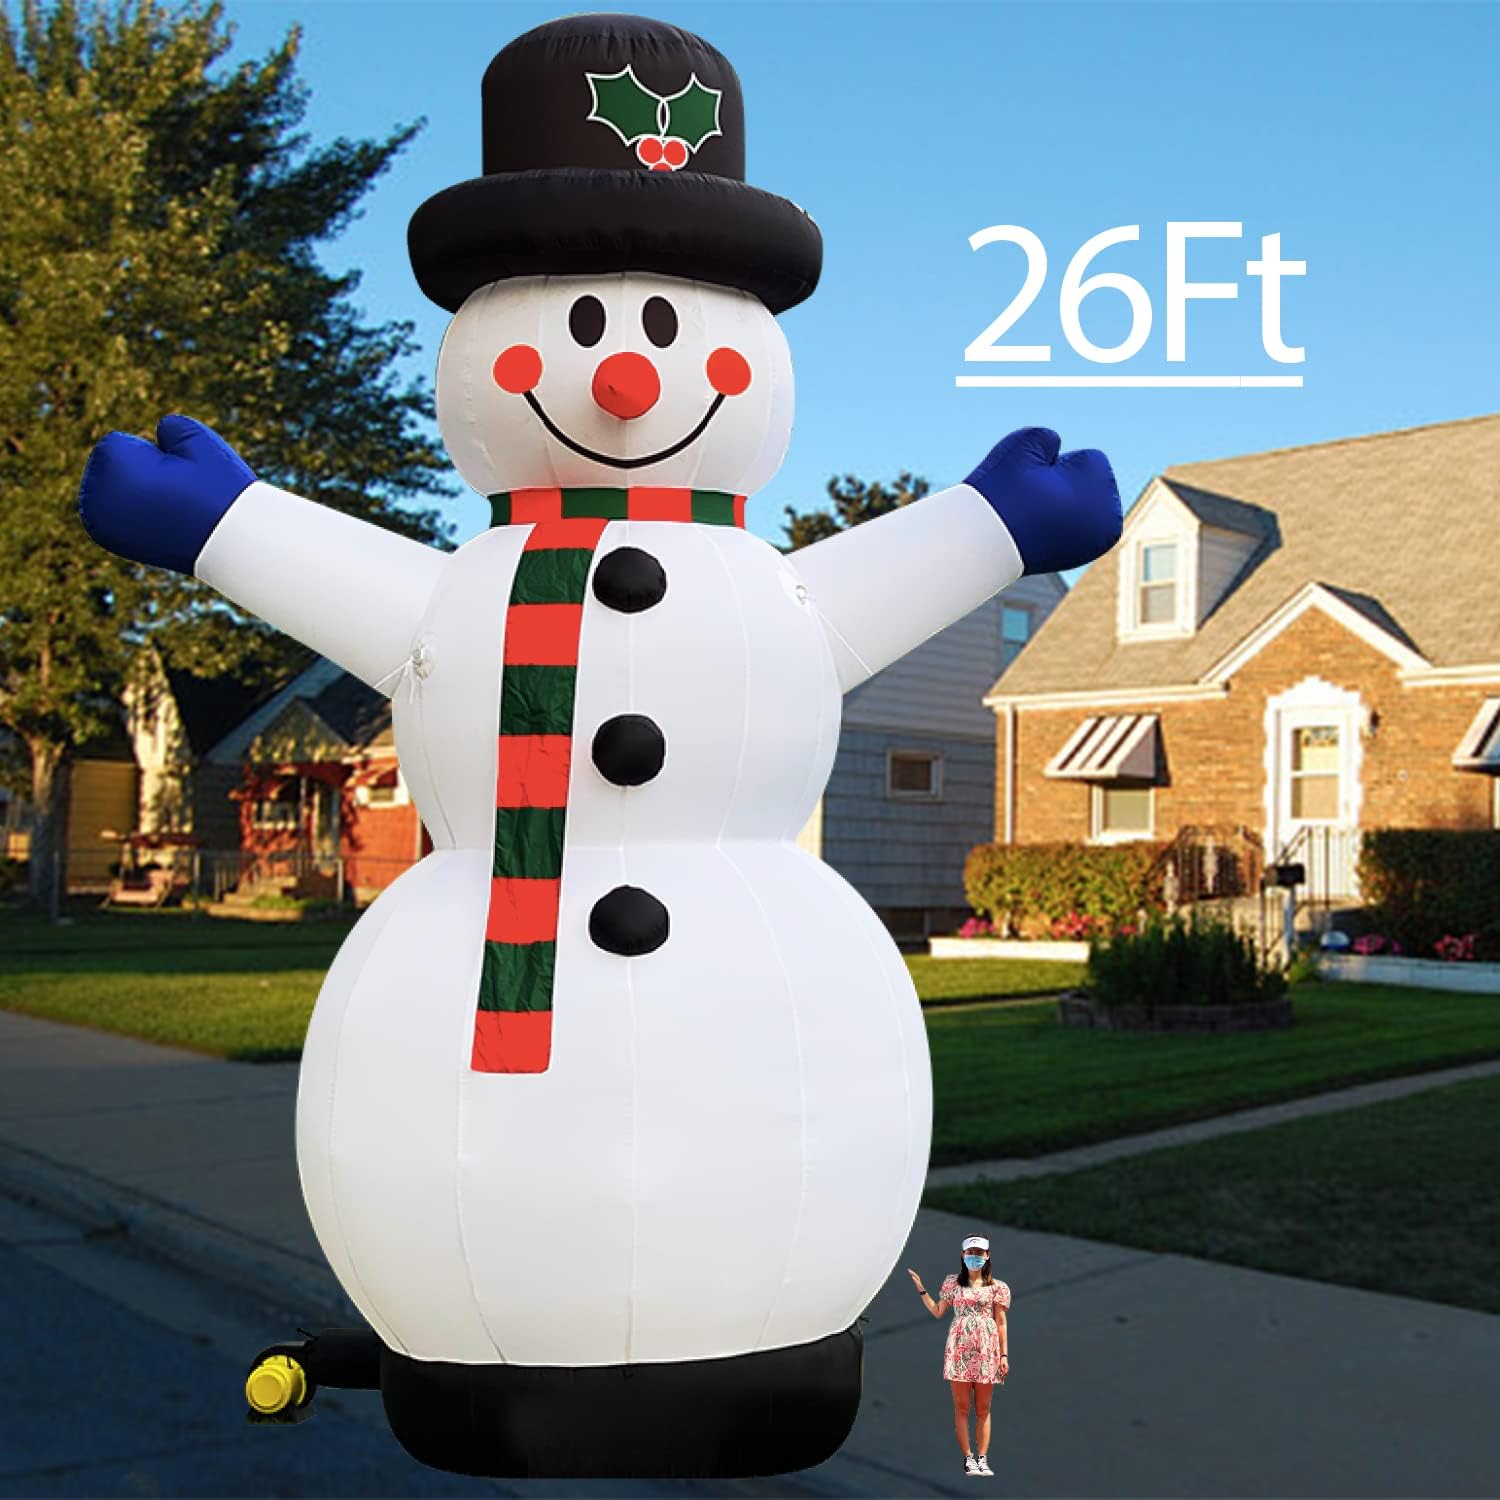 26Ft Giant Inflatable Snowman for Christmas with Blower Snowman Inflatable Outdoor Yard Decoration Lawn Xmas Party Blow Up Decoration with No Light